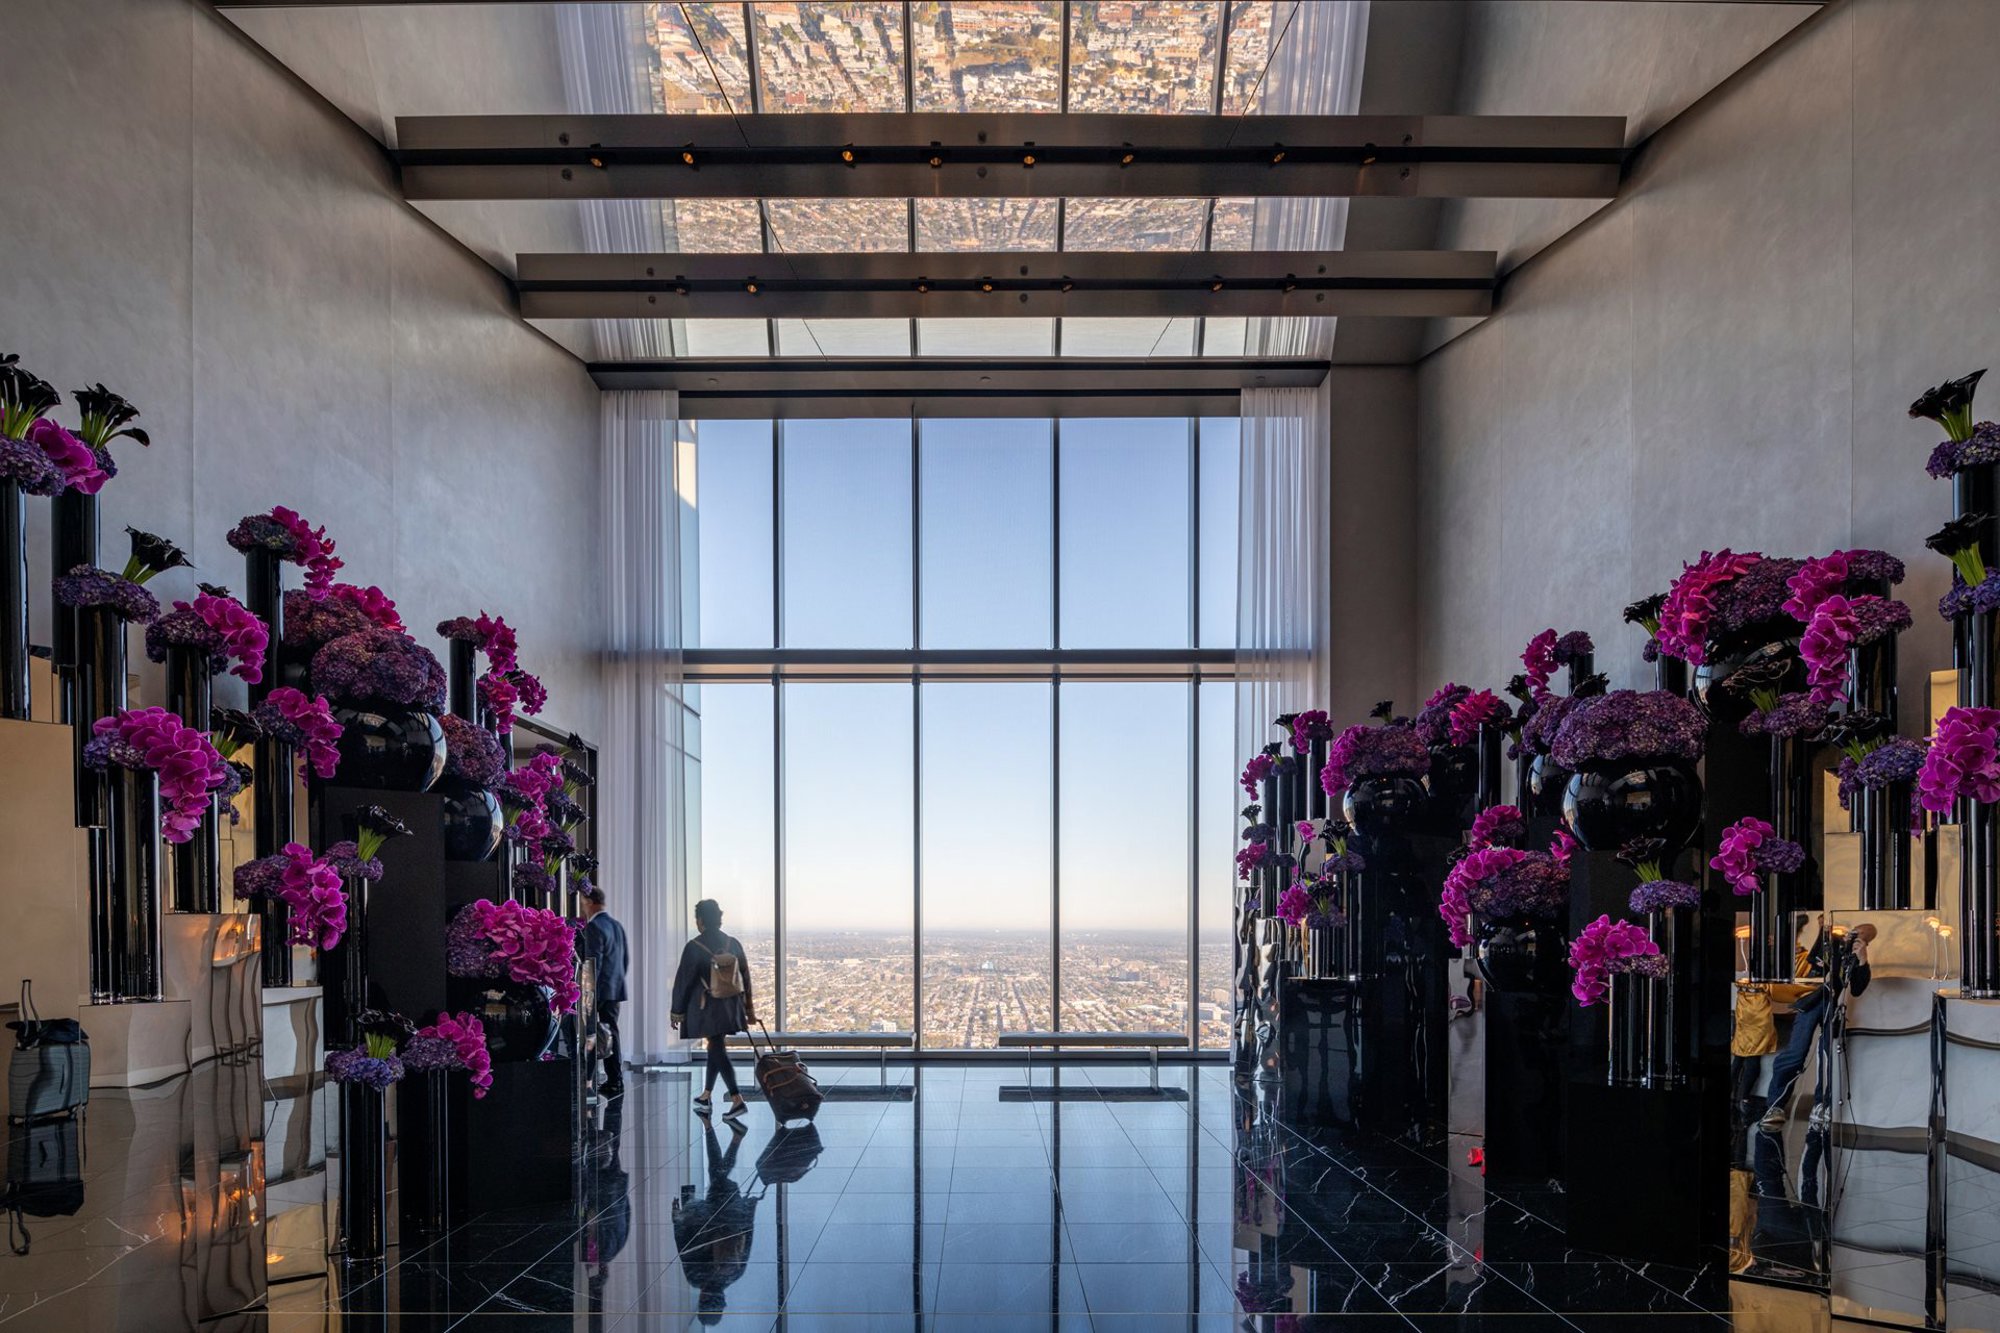 On arrival at the hotel on top of the tower, stepping out of the north-facing elevators, guests are greeted by the first glimpses of the 360-degree panoramic views that encircle the upper floors. © Nigel Young / Foster + Partners